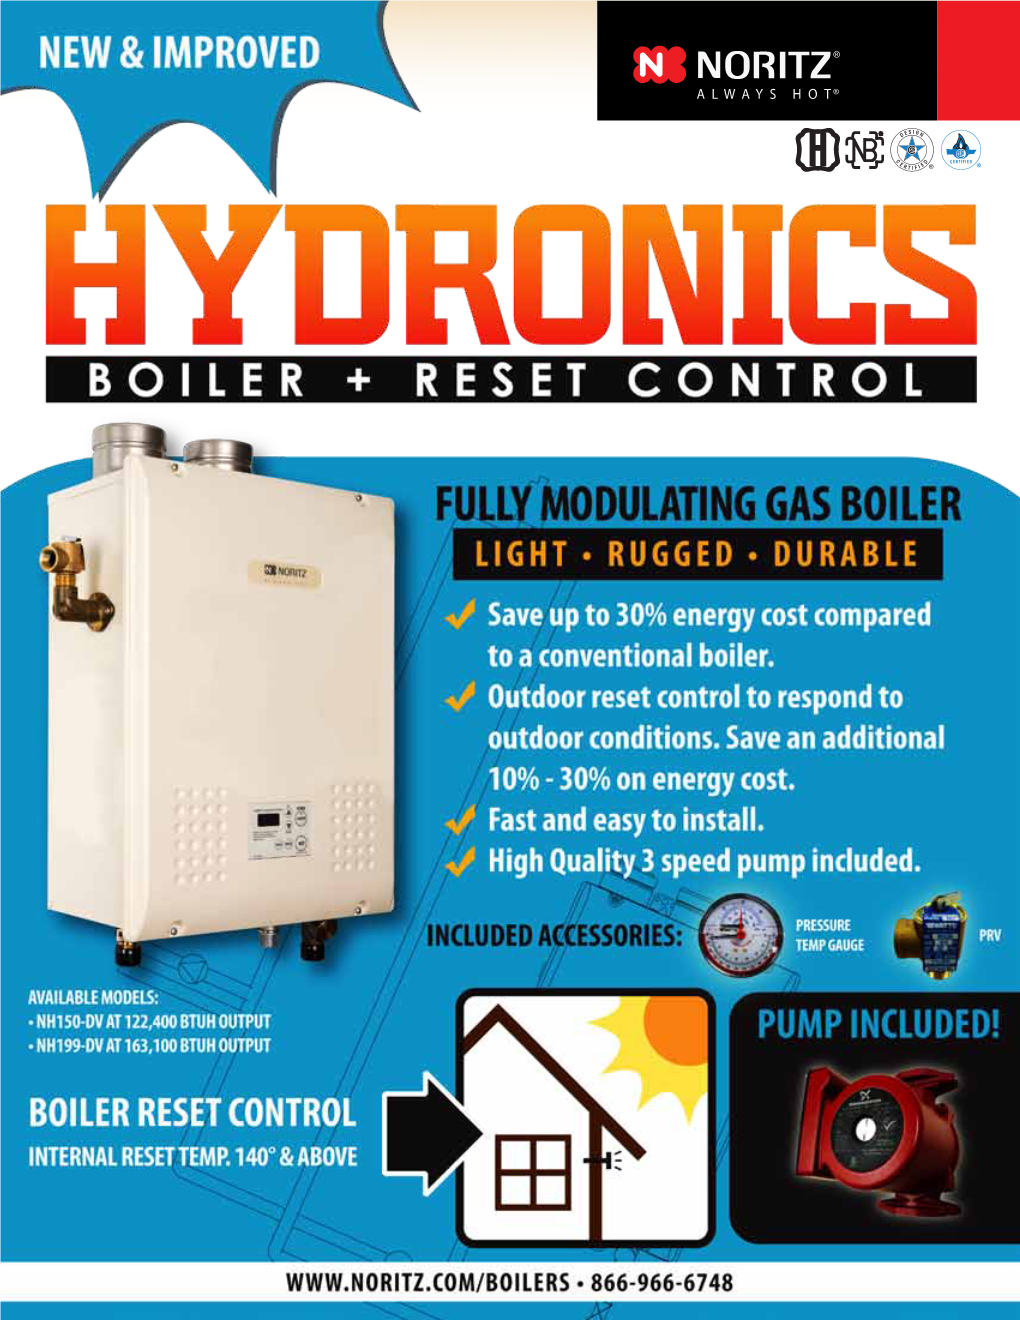 Noritz Hydronics Boiler with Reset Control + Pump Package